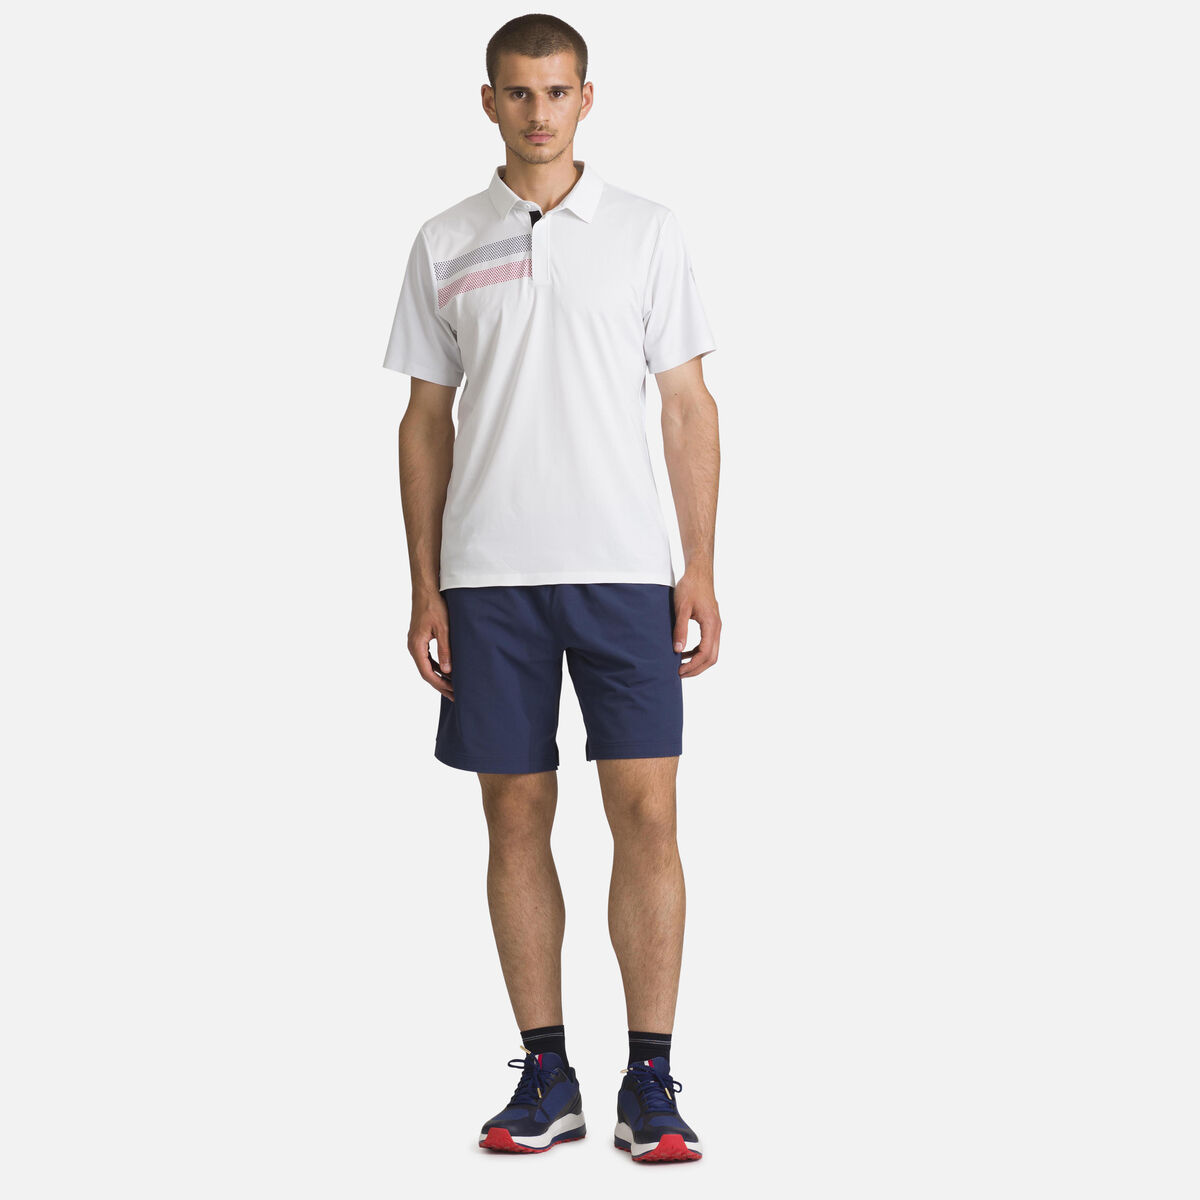 Rossignol Men's lightweight breathable polo shirt White